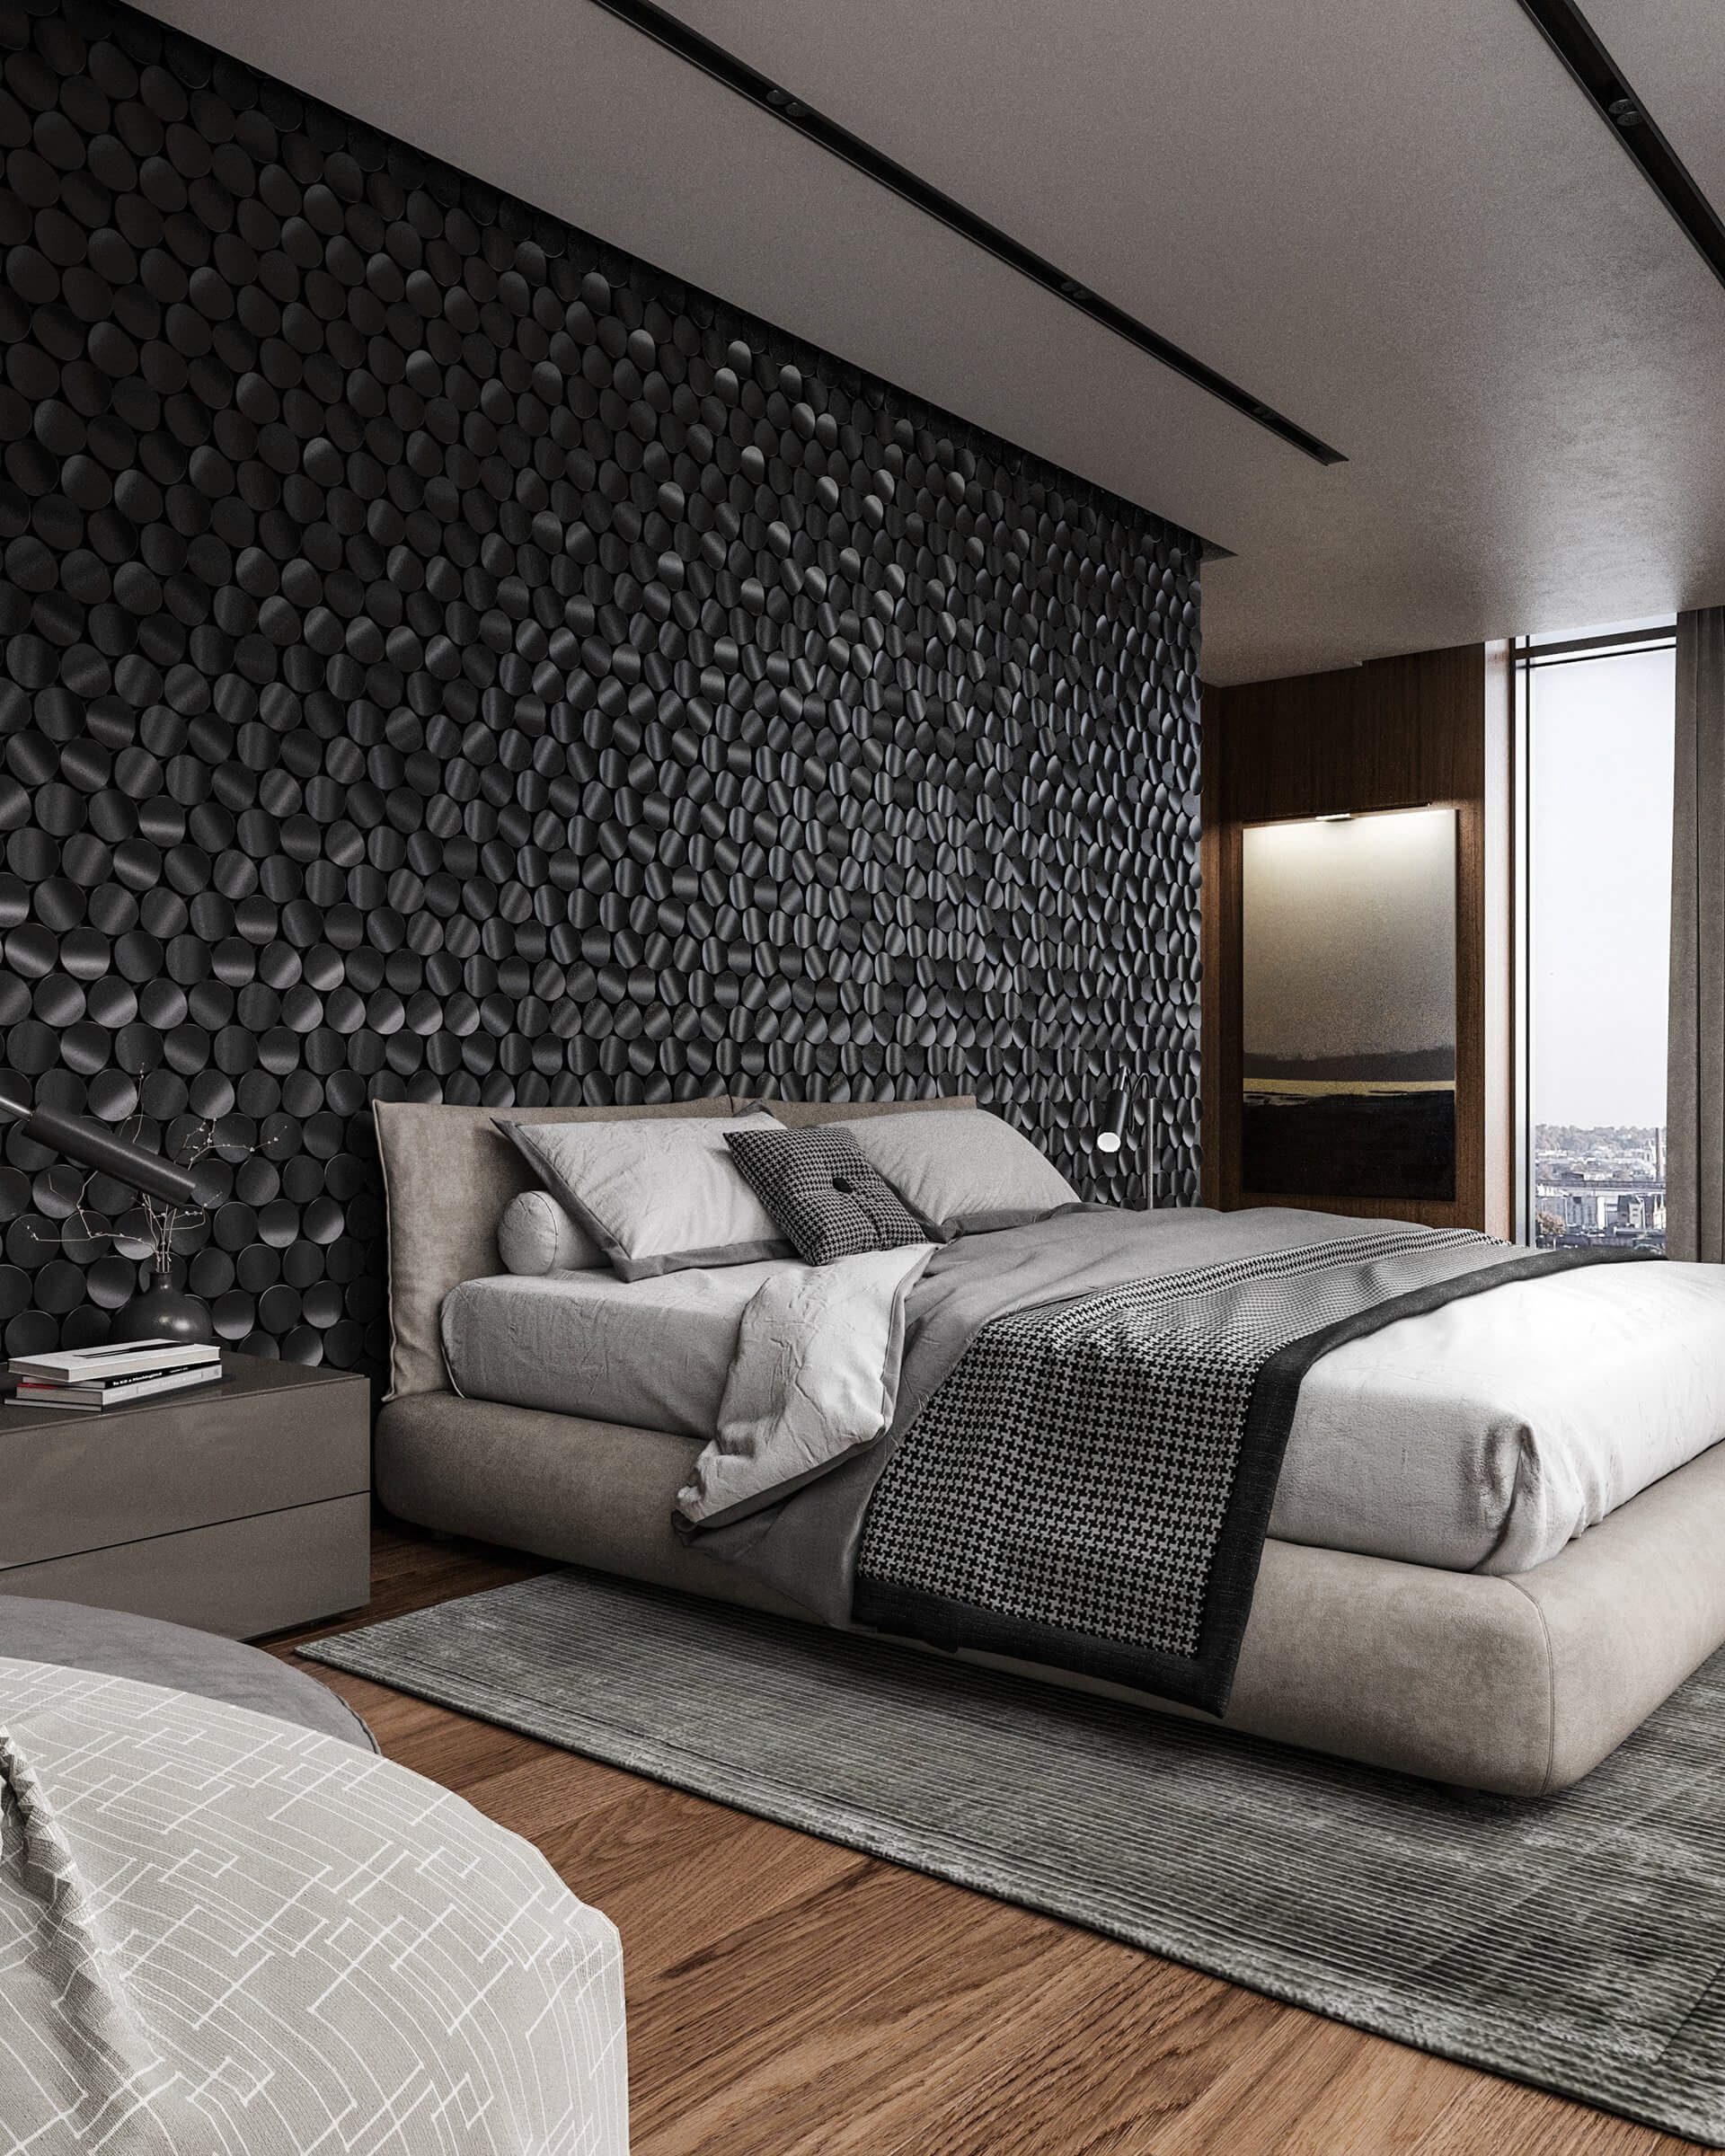 Interior Apartment project Pluses bedroom black wall pattern design - cgi visualization